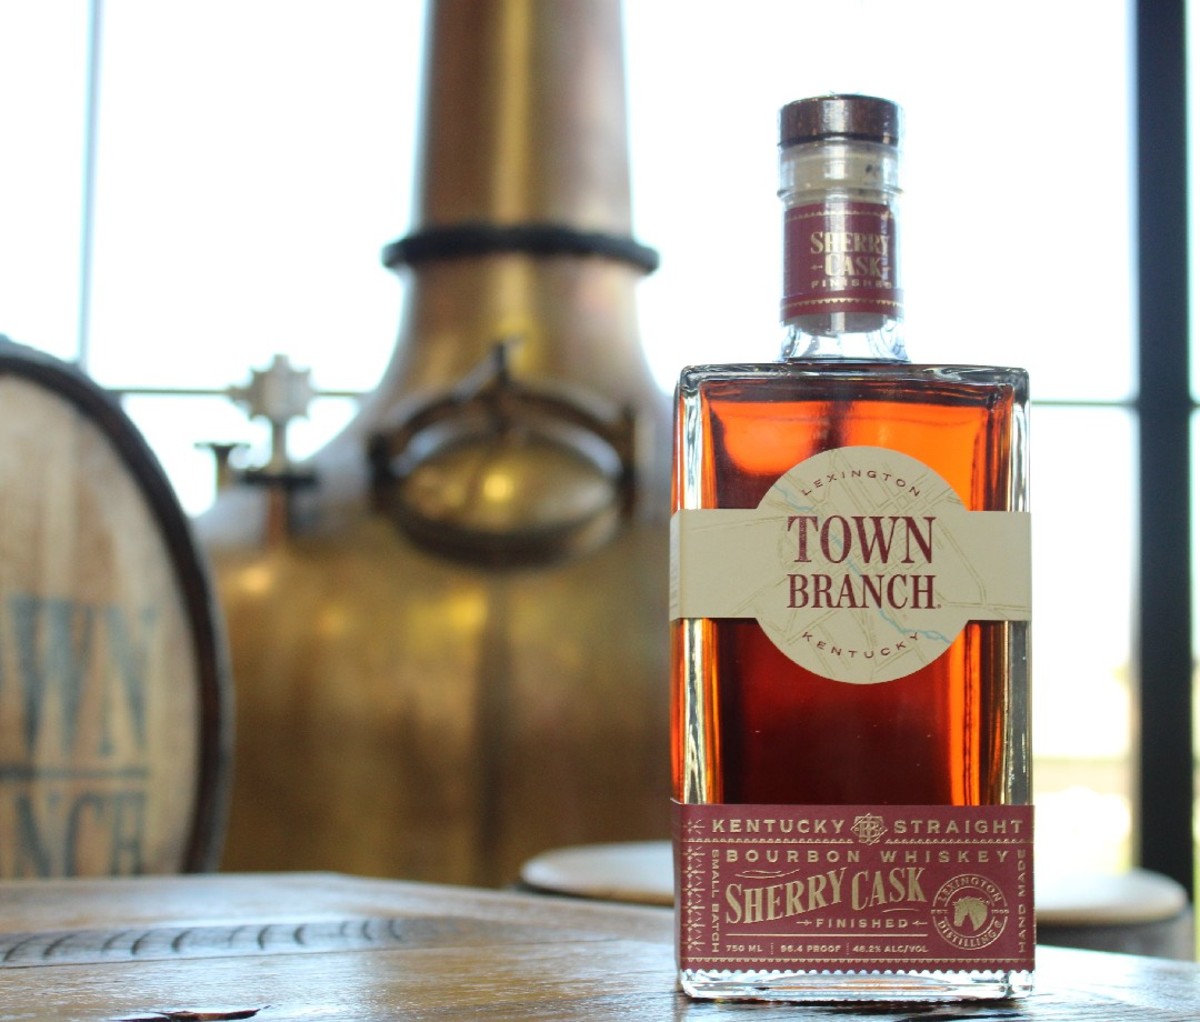 Bottle of Town Branch Sherry Cask-Finished Bourbon Whiskey on a table